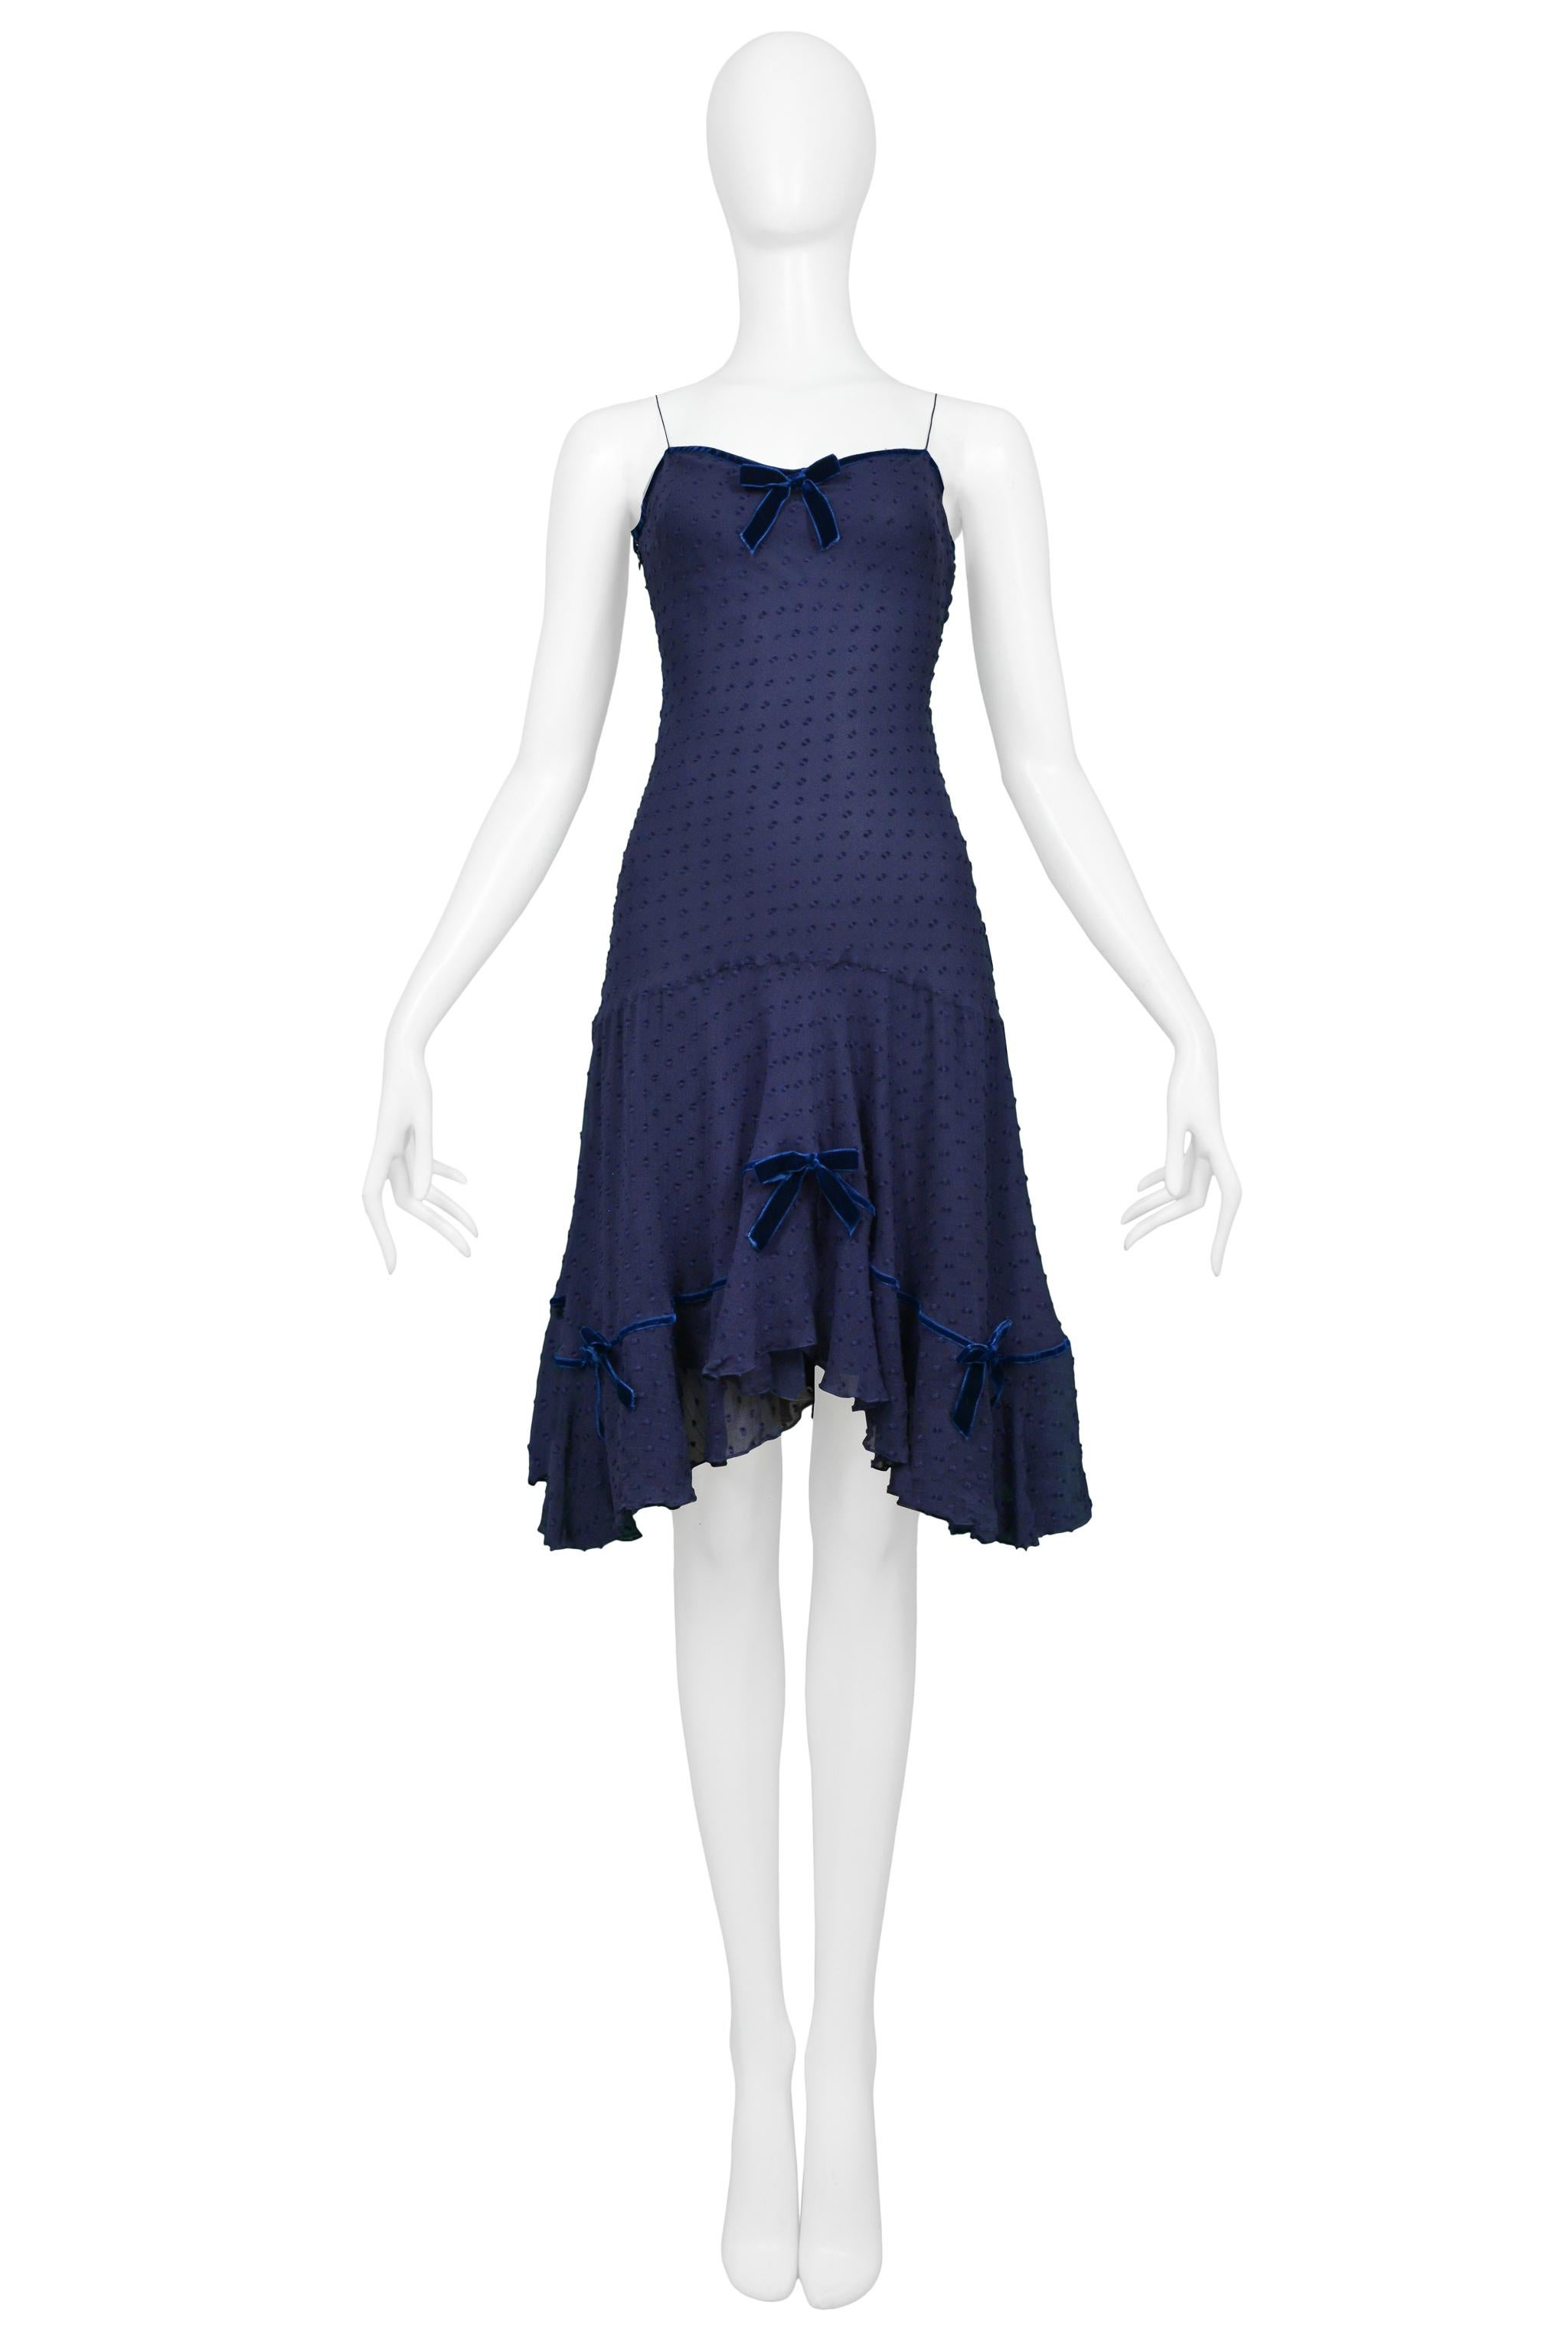 Resurrection Vintage is excited to offer a vintage navy blue John Galliano slip dress featuring classic Swiss dot fabric, blue velvet ribbon bows at the neck and skirt, ruffles along the hemline, side buttons with added zipper, and skinny